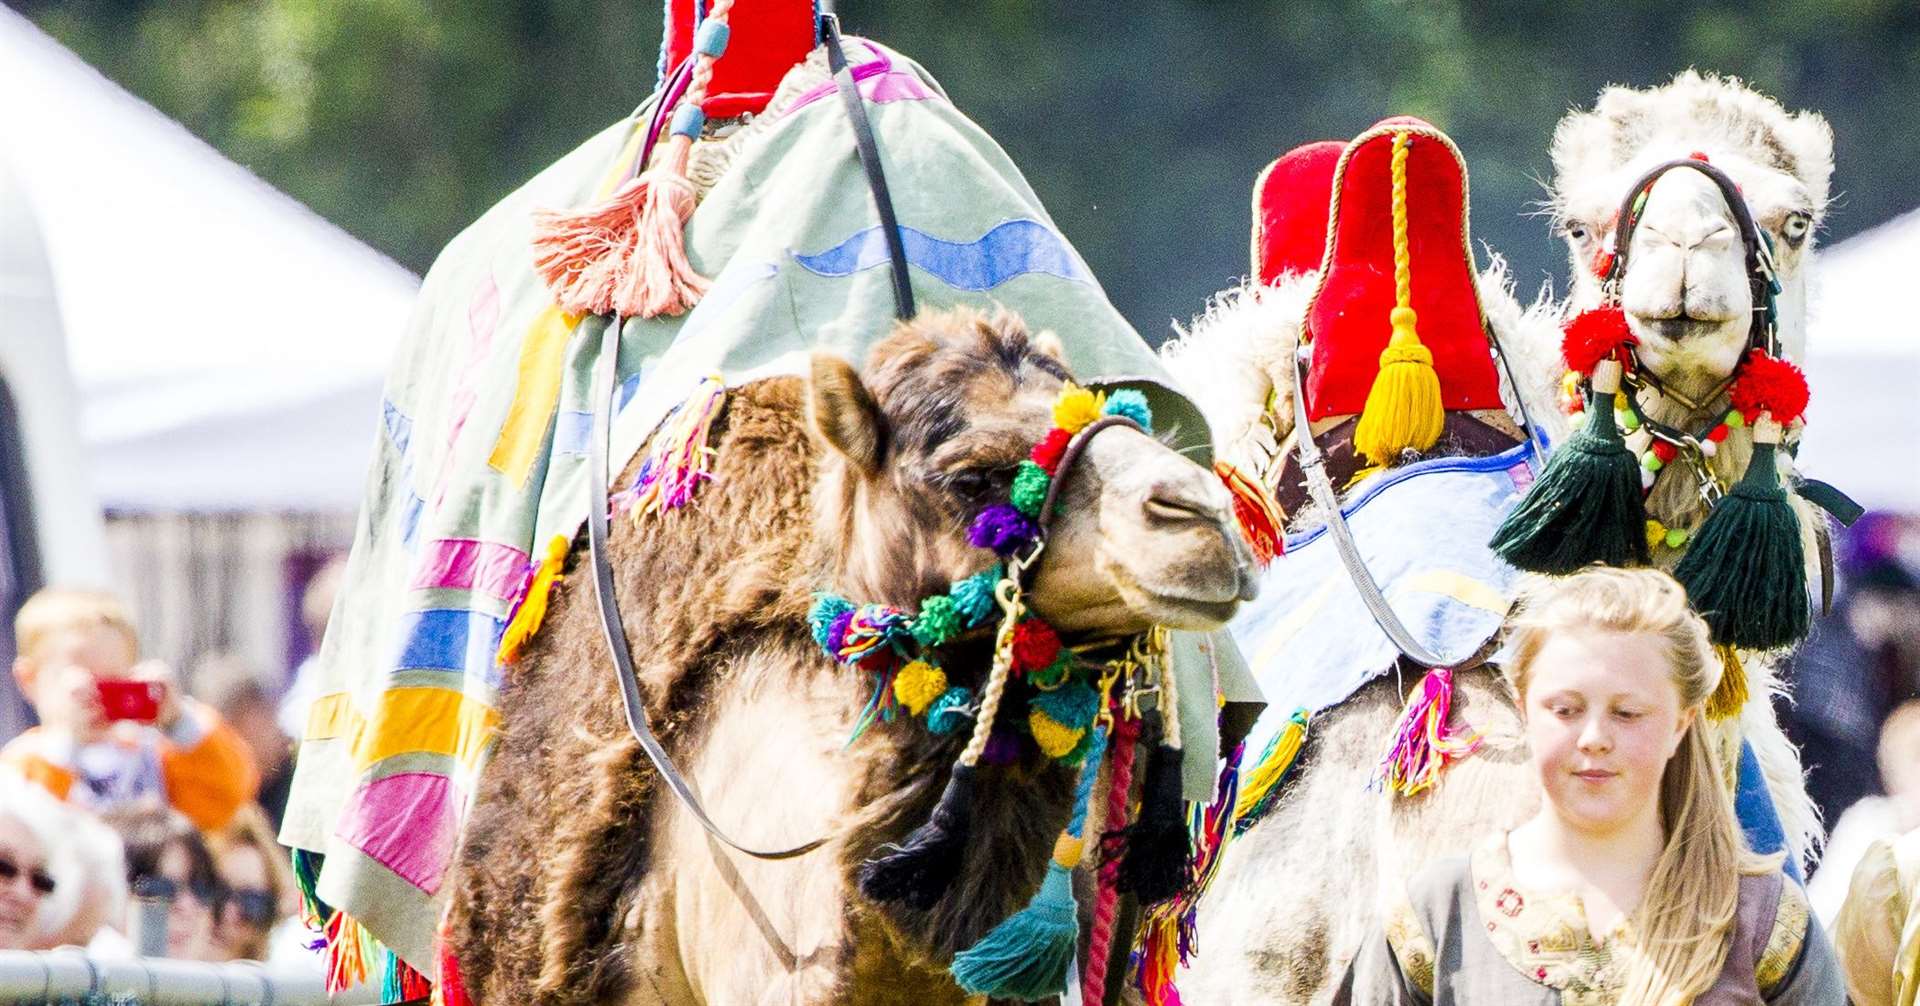 Racing camels are coming to the Kent County Show next summer